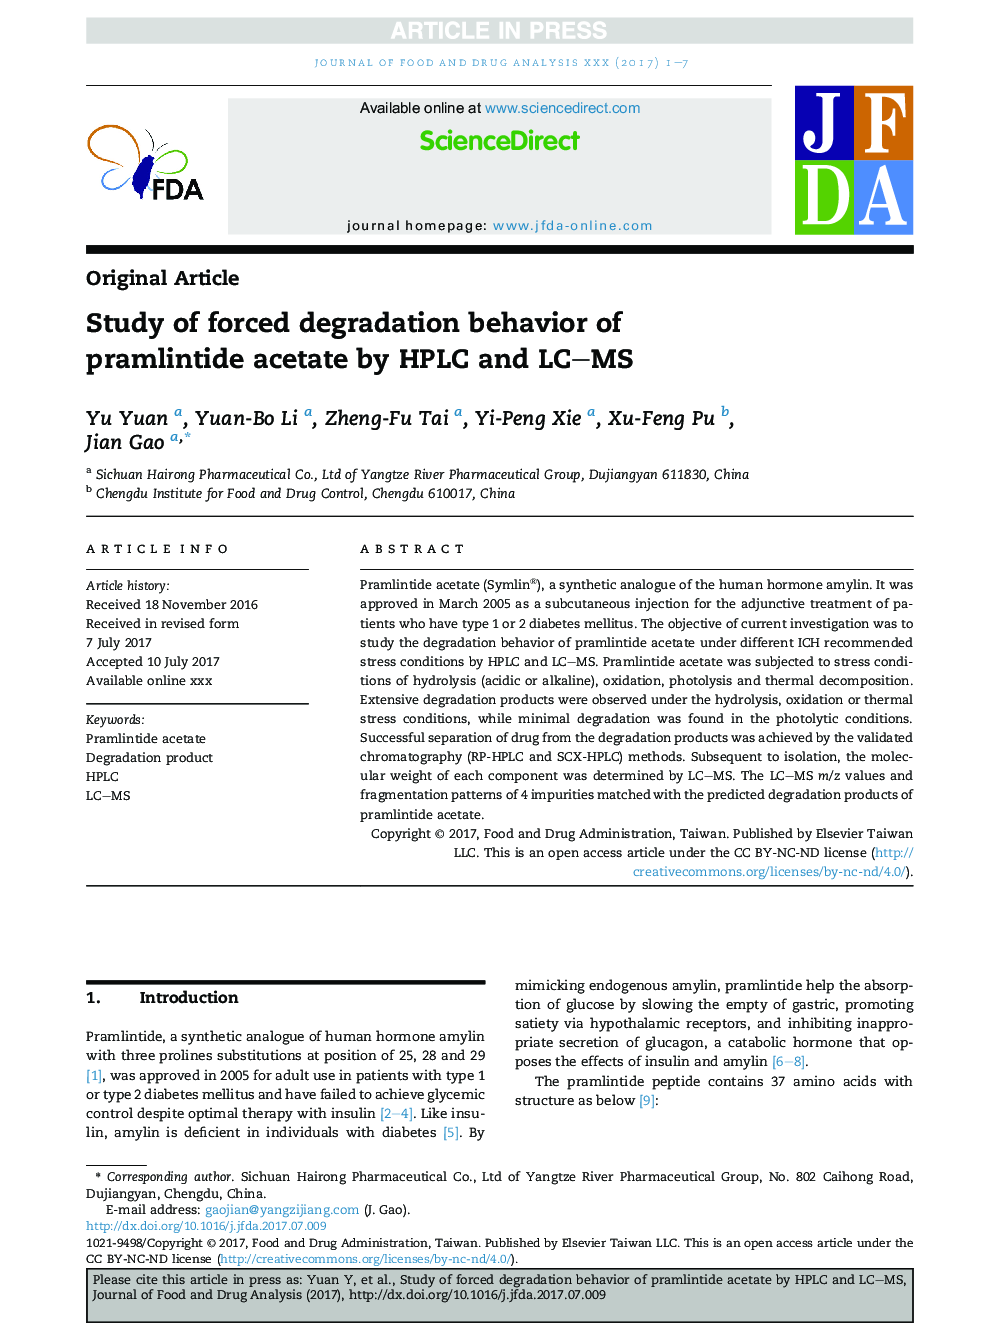 Study of forced degradation behavior of pramlintide acetate by HPLC and LC-MS